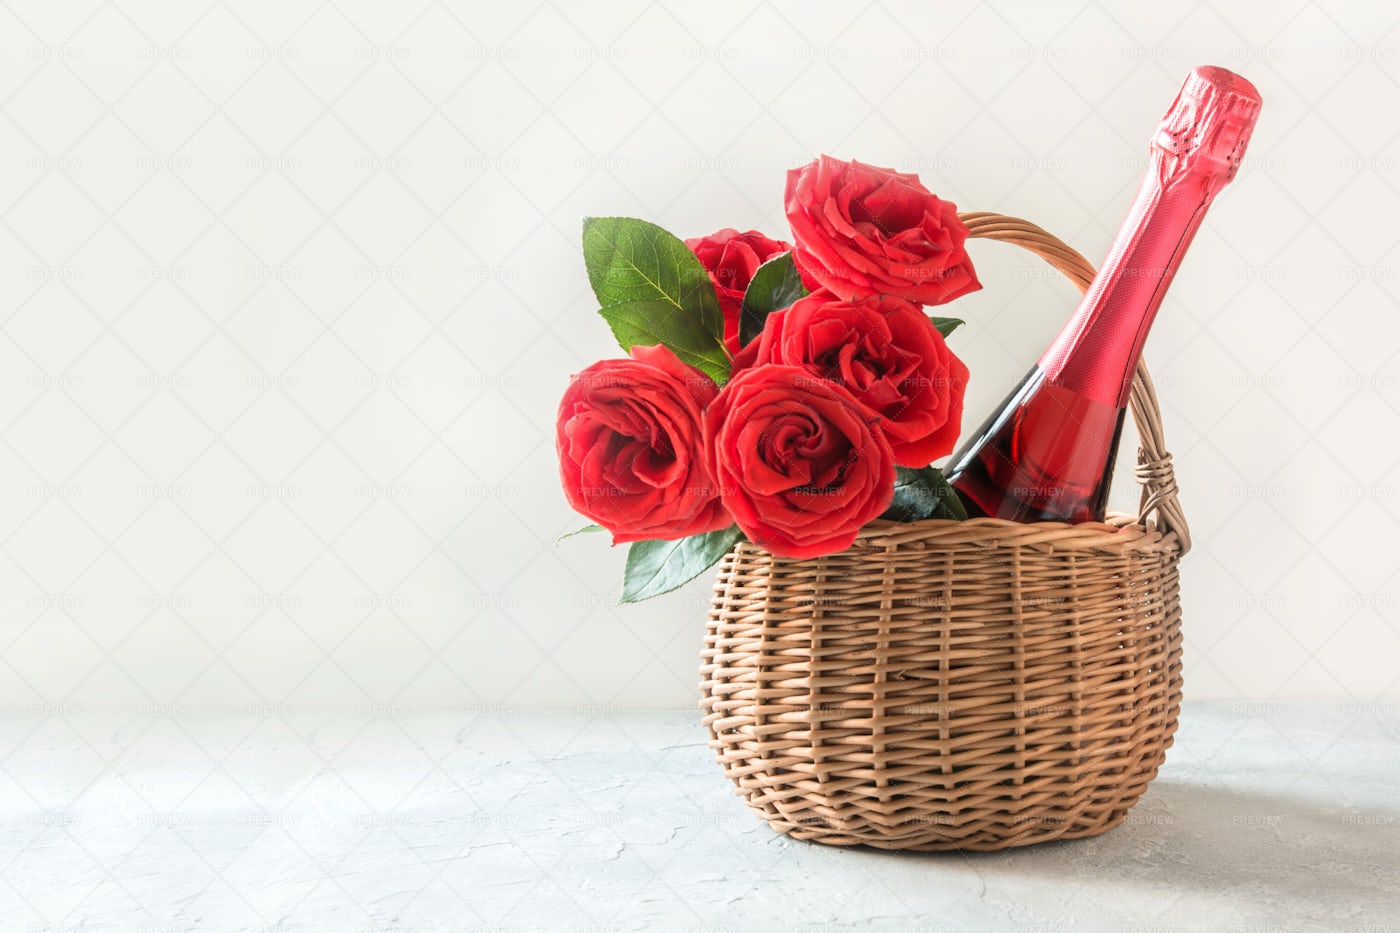 Gift Hamper, Roses And Champagne: Stock Photos